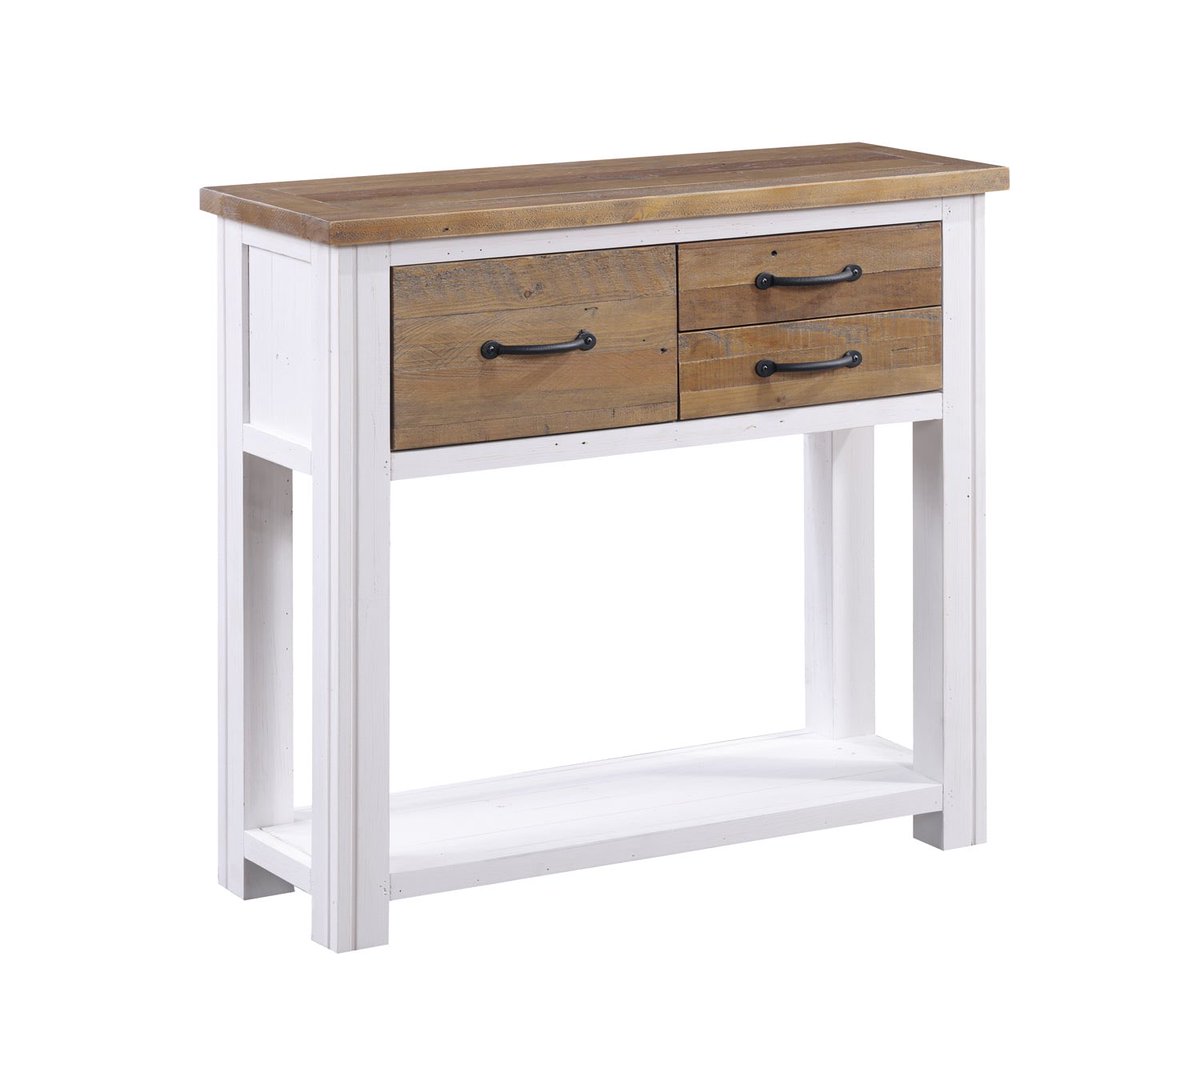 Obsessed with this white console table? Don’t just scroll, get it! Shop it now on our website before it sells out lavishkitchenisle.com/products/white…

#console #WhiteFurniture #entrywaydecor #spacesaving #declutter #homedecor #Dubai #HalaMadrid #ManCity